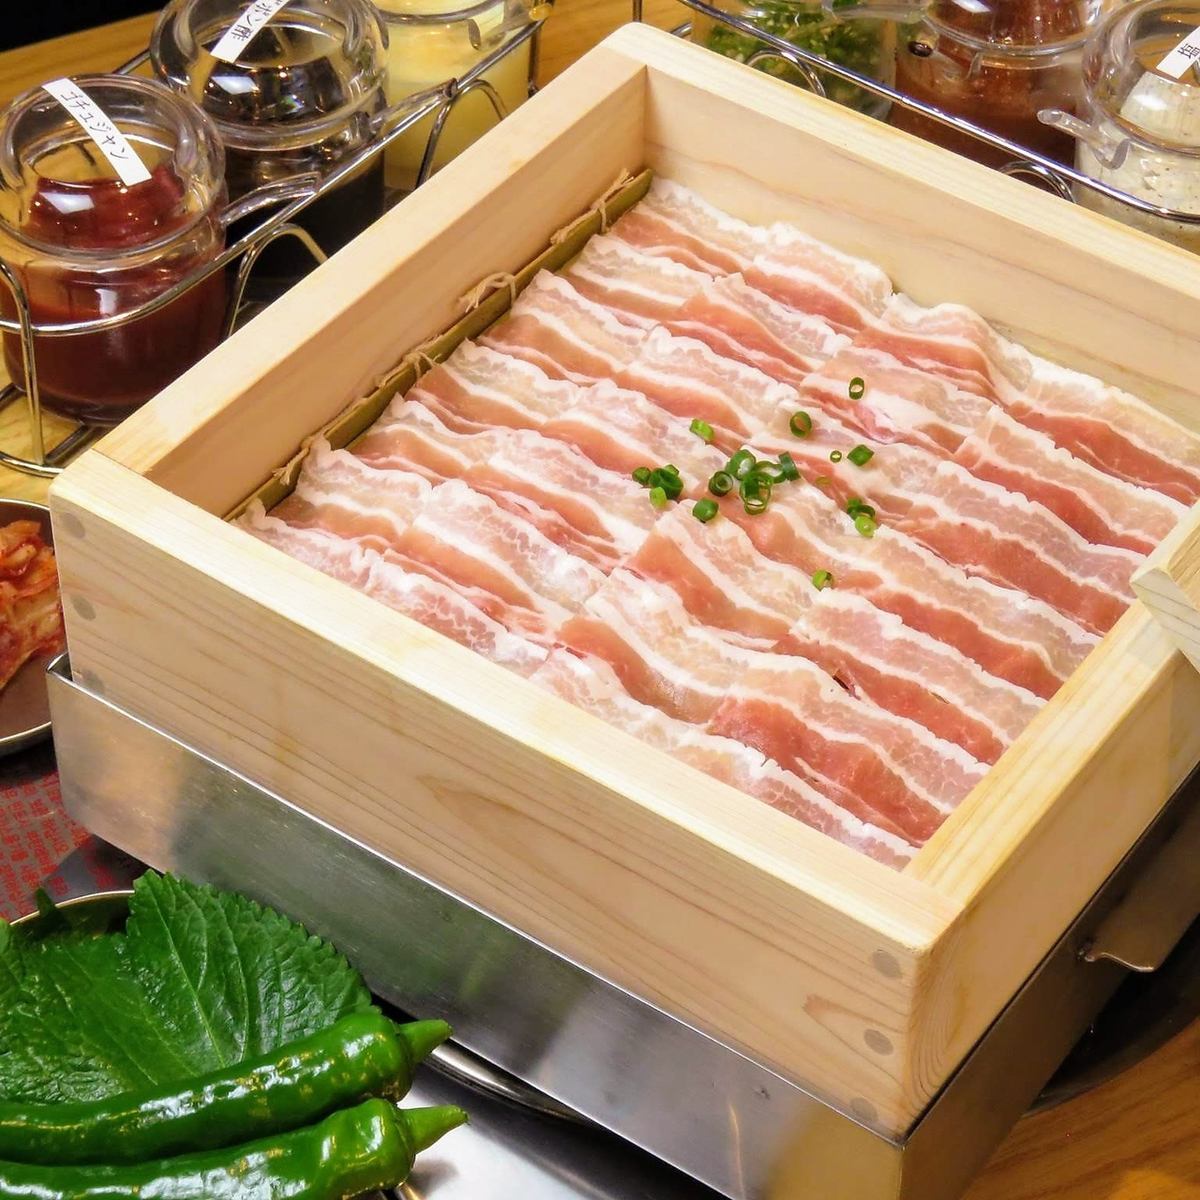 [Exquisite] All-you-can-eat beef samgyeopsal! Surprise with "9" 36"!